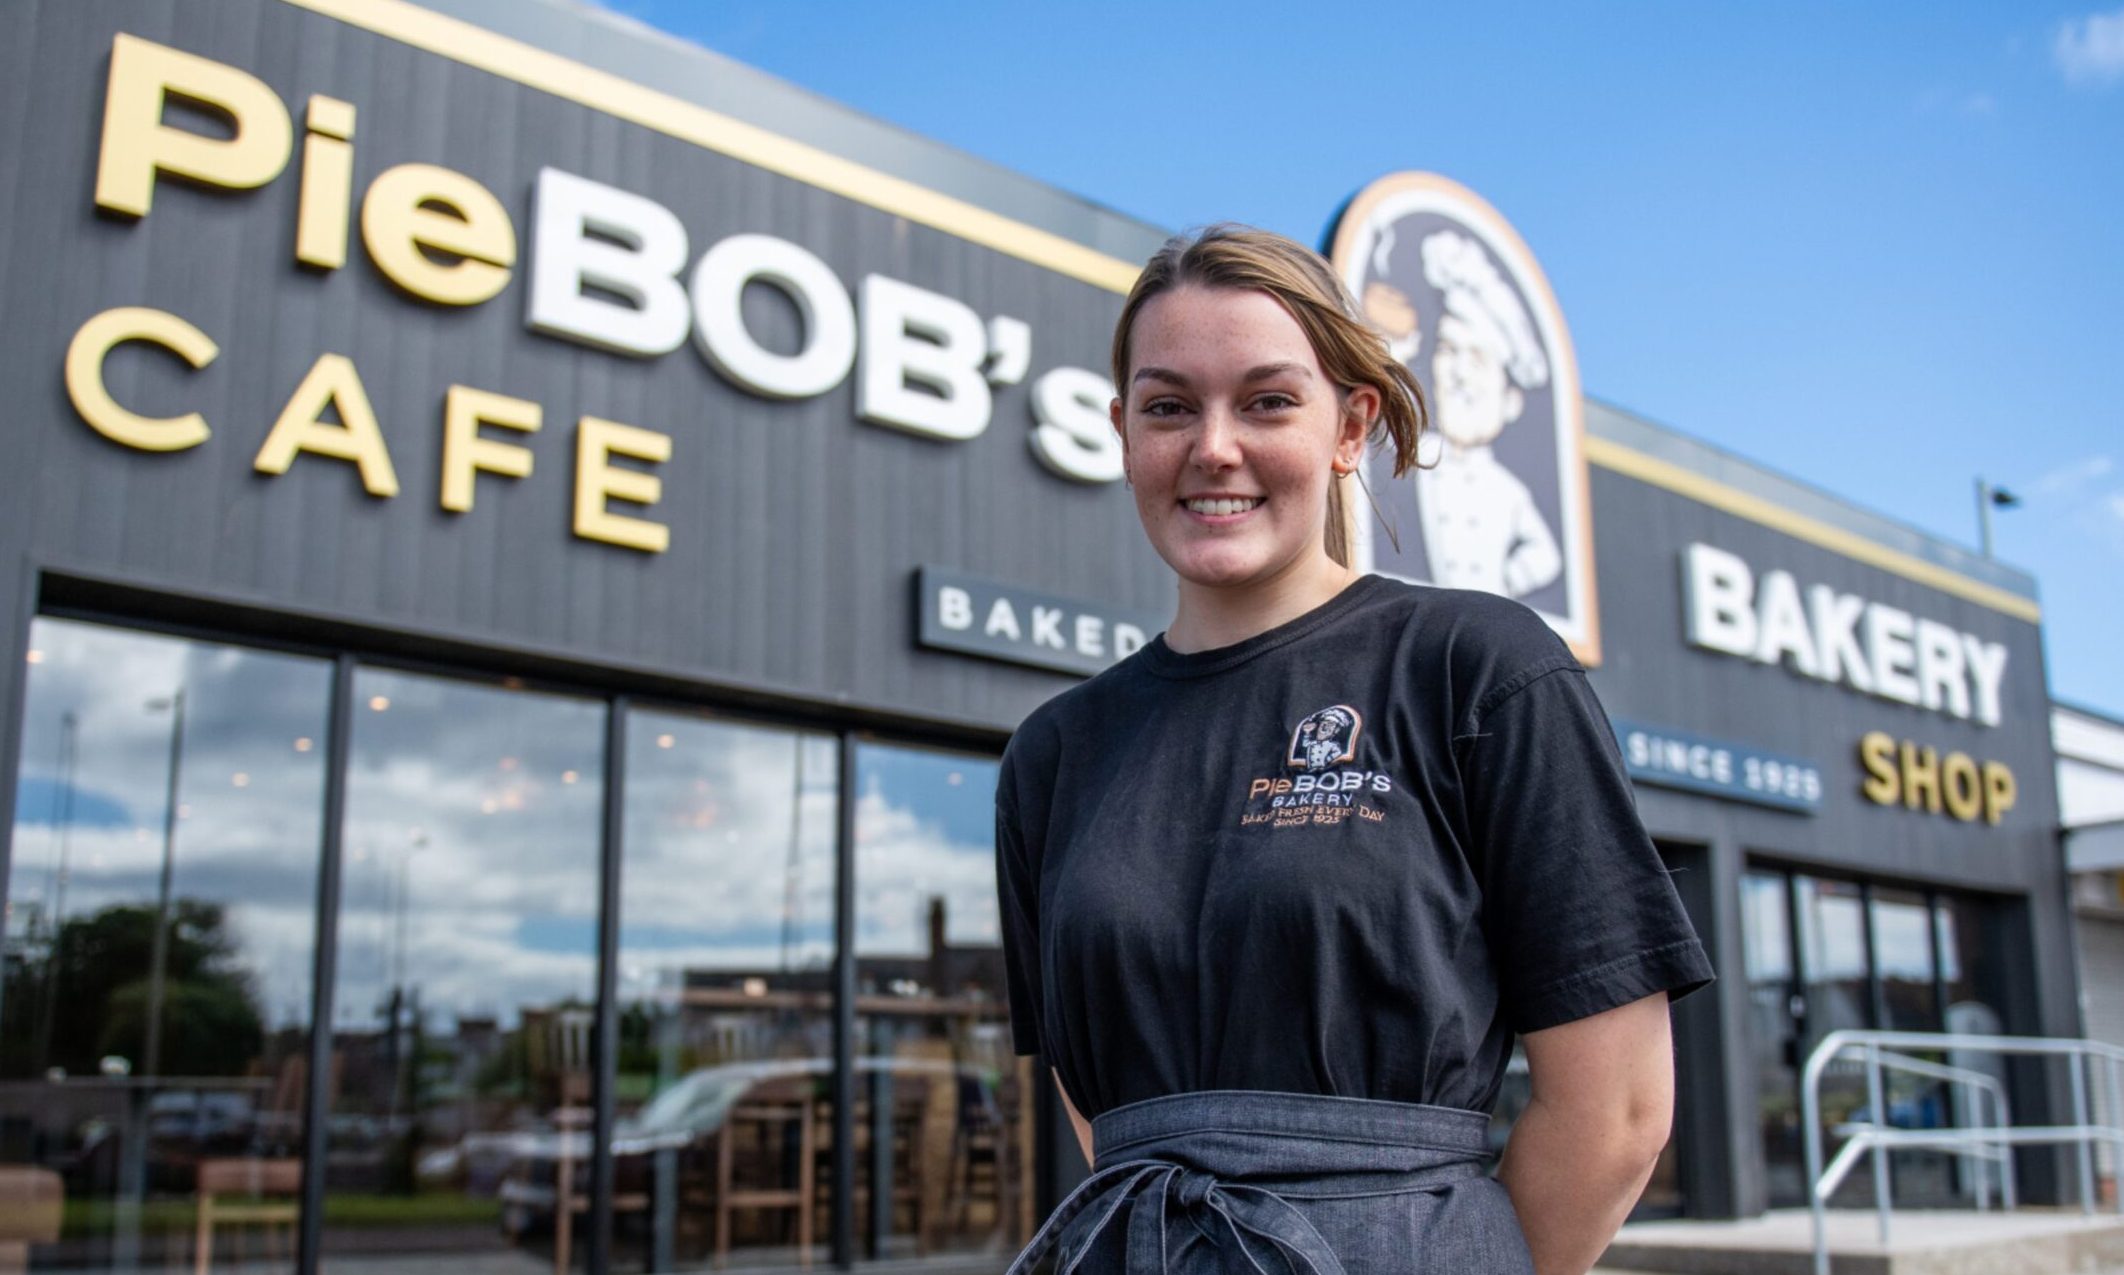 Emily Elford-Minott, 26, is opening up the new Pie Bob's cafe in Arbroath. Image: Kim Cessford / DC Thomson